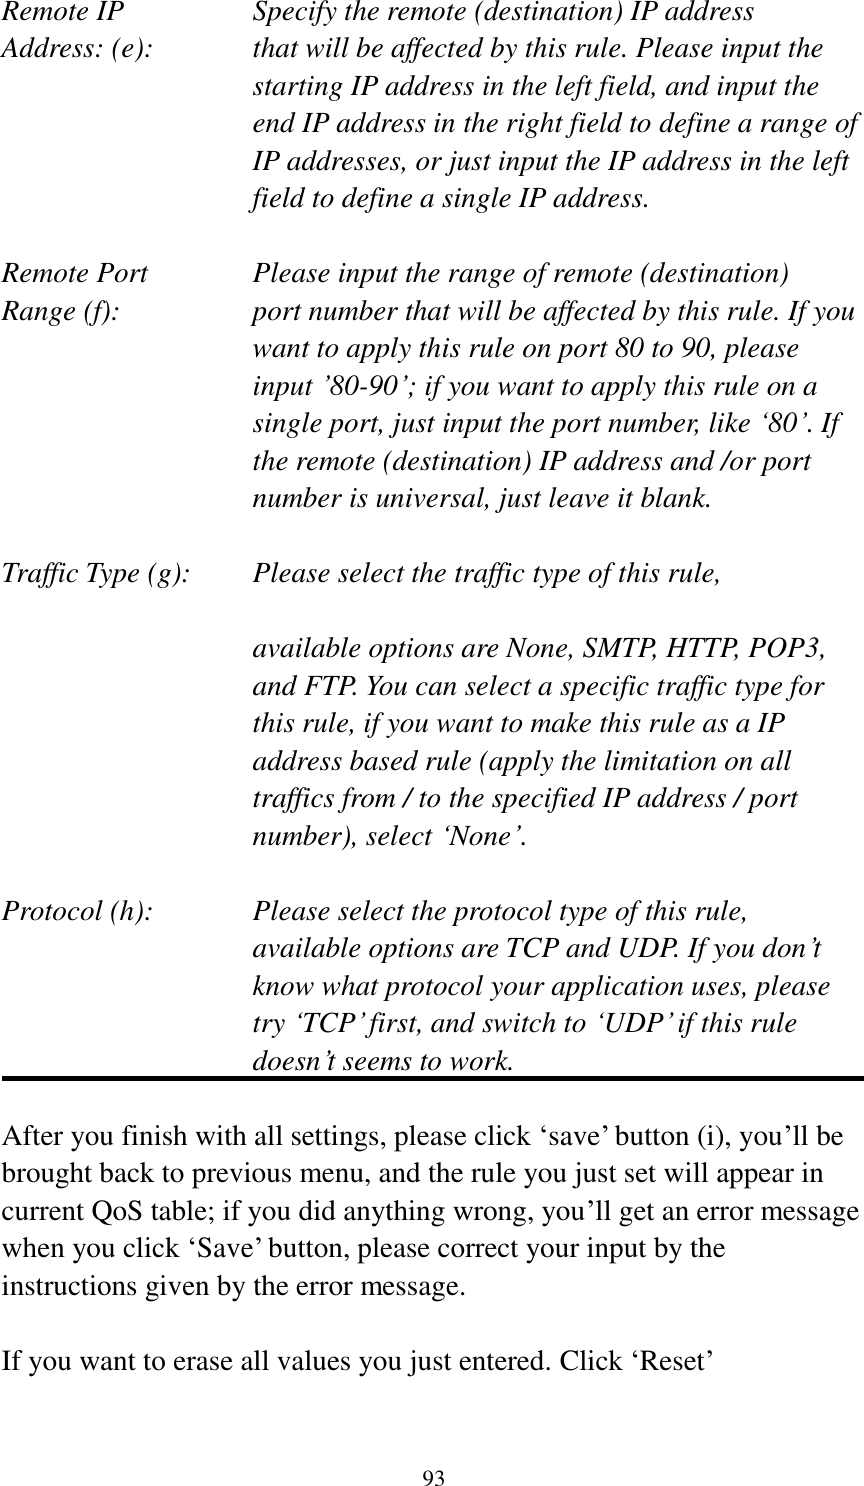 93 Remote IP        Specify the remote (destination) IP address Address: (e):    that will be affected by this rule. Please input the starting IP address in the left field, and input the end IP address in the right field to define a range of IP addresses, or just input the IP address in the left field to define a single IP address.  Remote Port      Please input the range of remote (destination) Range (f):  port number that will be affected by this rule. If you want to apply this rule on port 80 to 90, please input ‟80-90‟; if you want to apply this rule on a single port, just input the port number, like „80‟. If the remote (destination) IP address and /or port number is universal, just leave it blank.  Traffic Type (g):    Please select the traffic type of this rule,  available options are None, SMTP, HTTP, POP3, and FTP. You can select a specific traffic type for this rule, if you want to make this rule as a IP address based rule (apply the limitation on all traffics from / to the specified IP address / port number), select „None‟.  Protocol (h):      Please select the protocol type of this rule,   available options are TCP and UDP. If you don‟t know what protocol your application uses, please try „TCP‟ first, and switch to „UDP‟ if this rule doesn‟t seems to work.  After you finish with all settings, please click „save‟ button (i), you‟ll be brought back to previous menu, and the rule you just set will appear in current QoS table; if you did anything wrong, you‟ll get an error message when you click „Save‟ button, please correct your input by the instructions given by the error message.  If you want to erase all values you just entered. Click „Reset‟ 